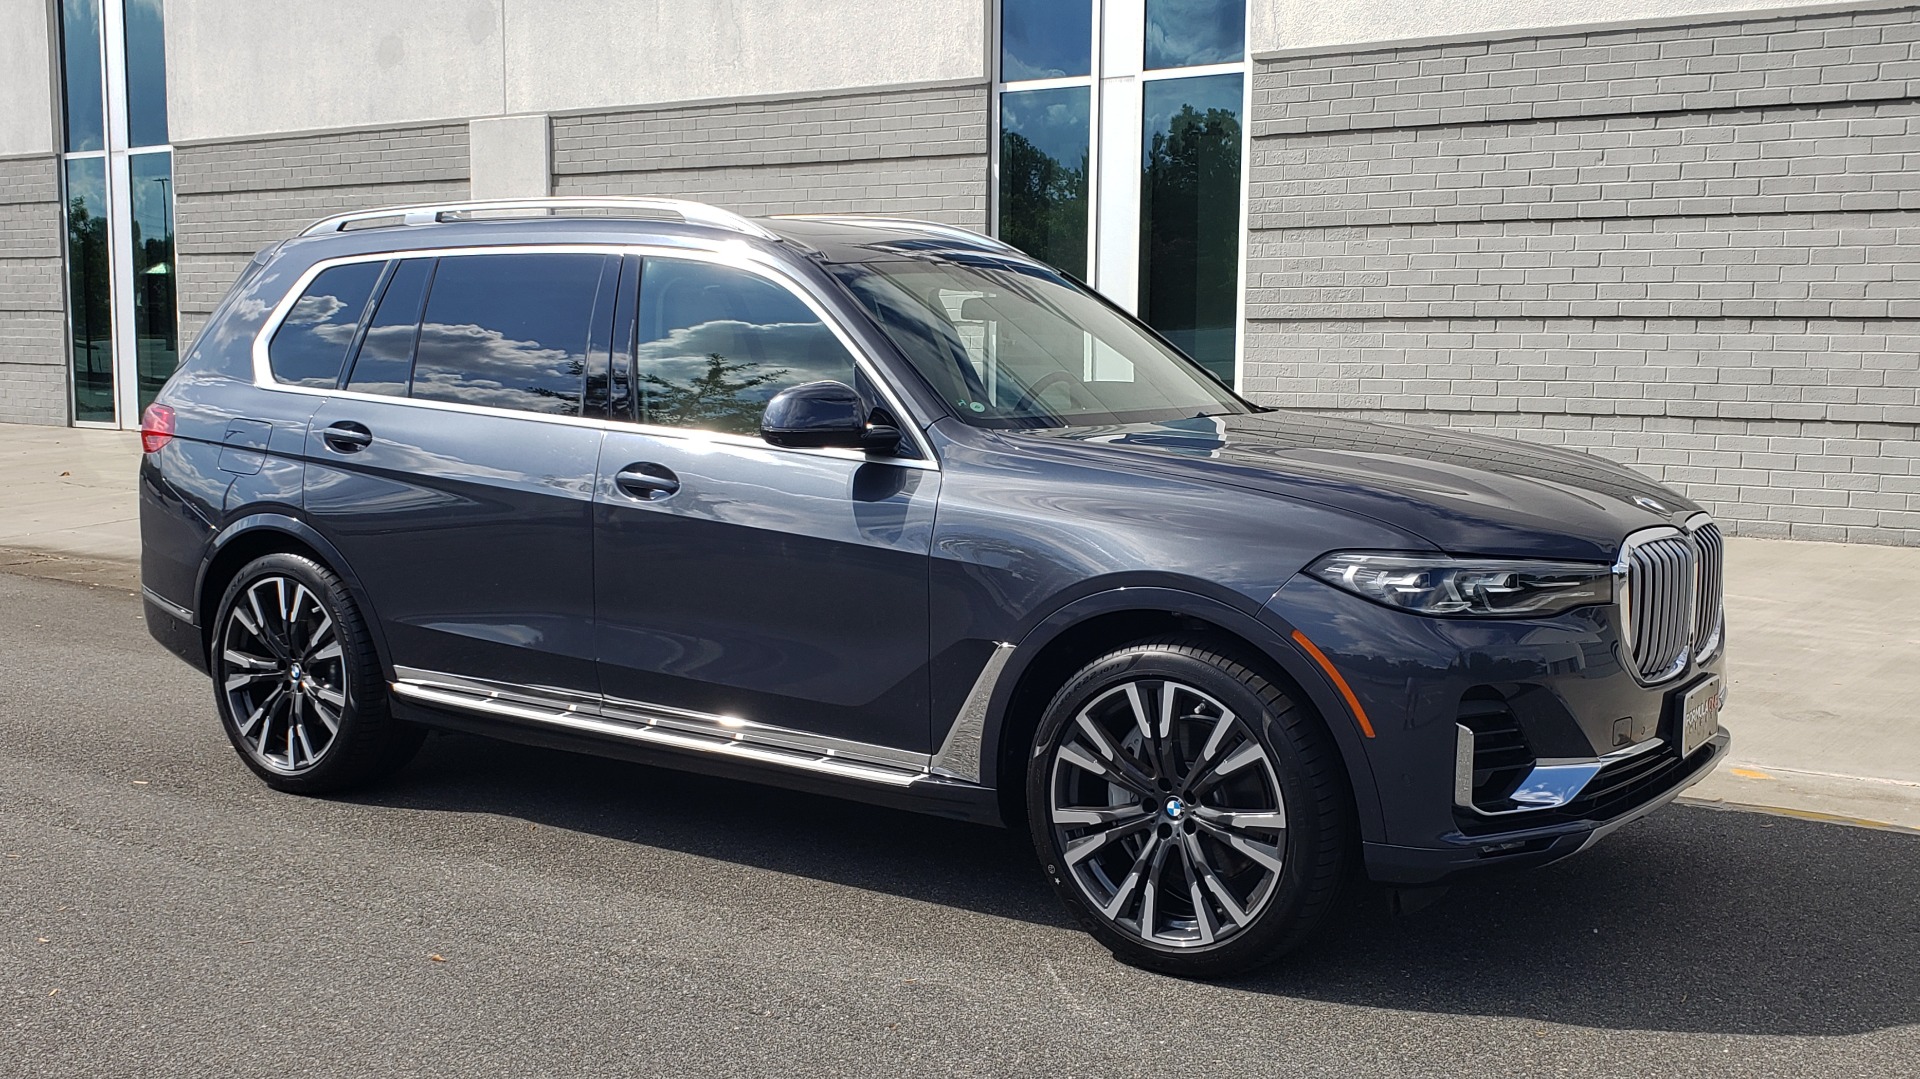 Used 2019 BMW X7 XDRIVE40I PREMIUM / LUXURY / COLD WEATHER / PARK ASST / PANORAMIC SKY / TOW for sale Sold at Formula Imports in Charlotte NC 28227 9